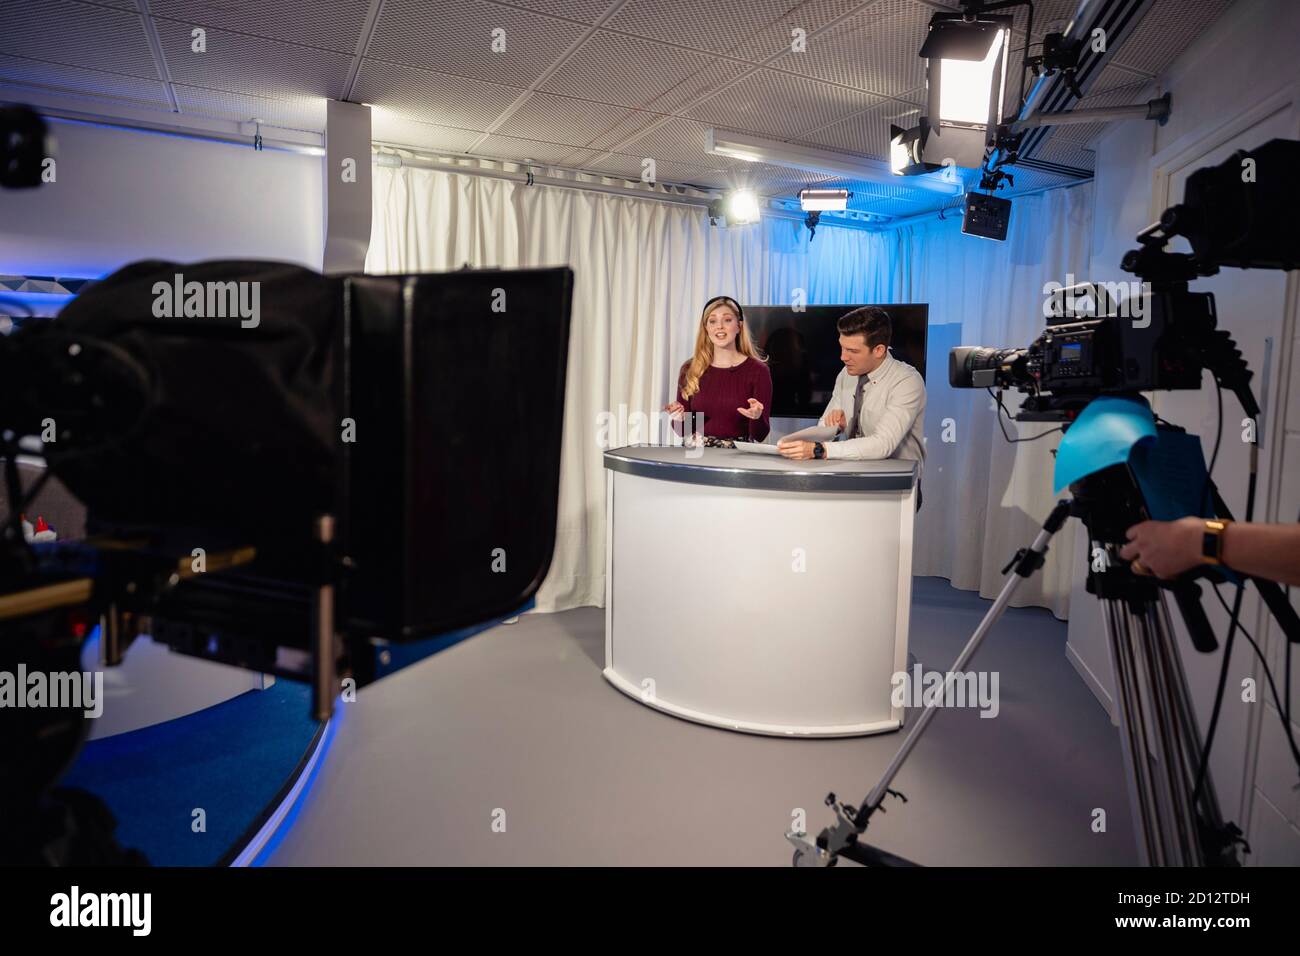 A TV show in the process of being filmed in a studio. The presenters are sitting at the studio desk, talking to the camera. Stock Photo